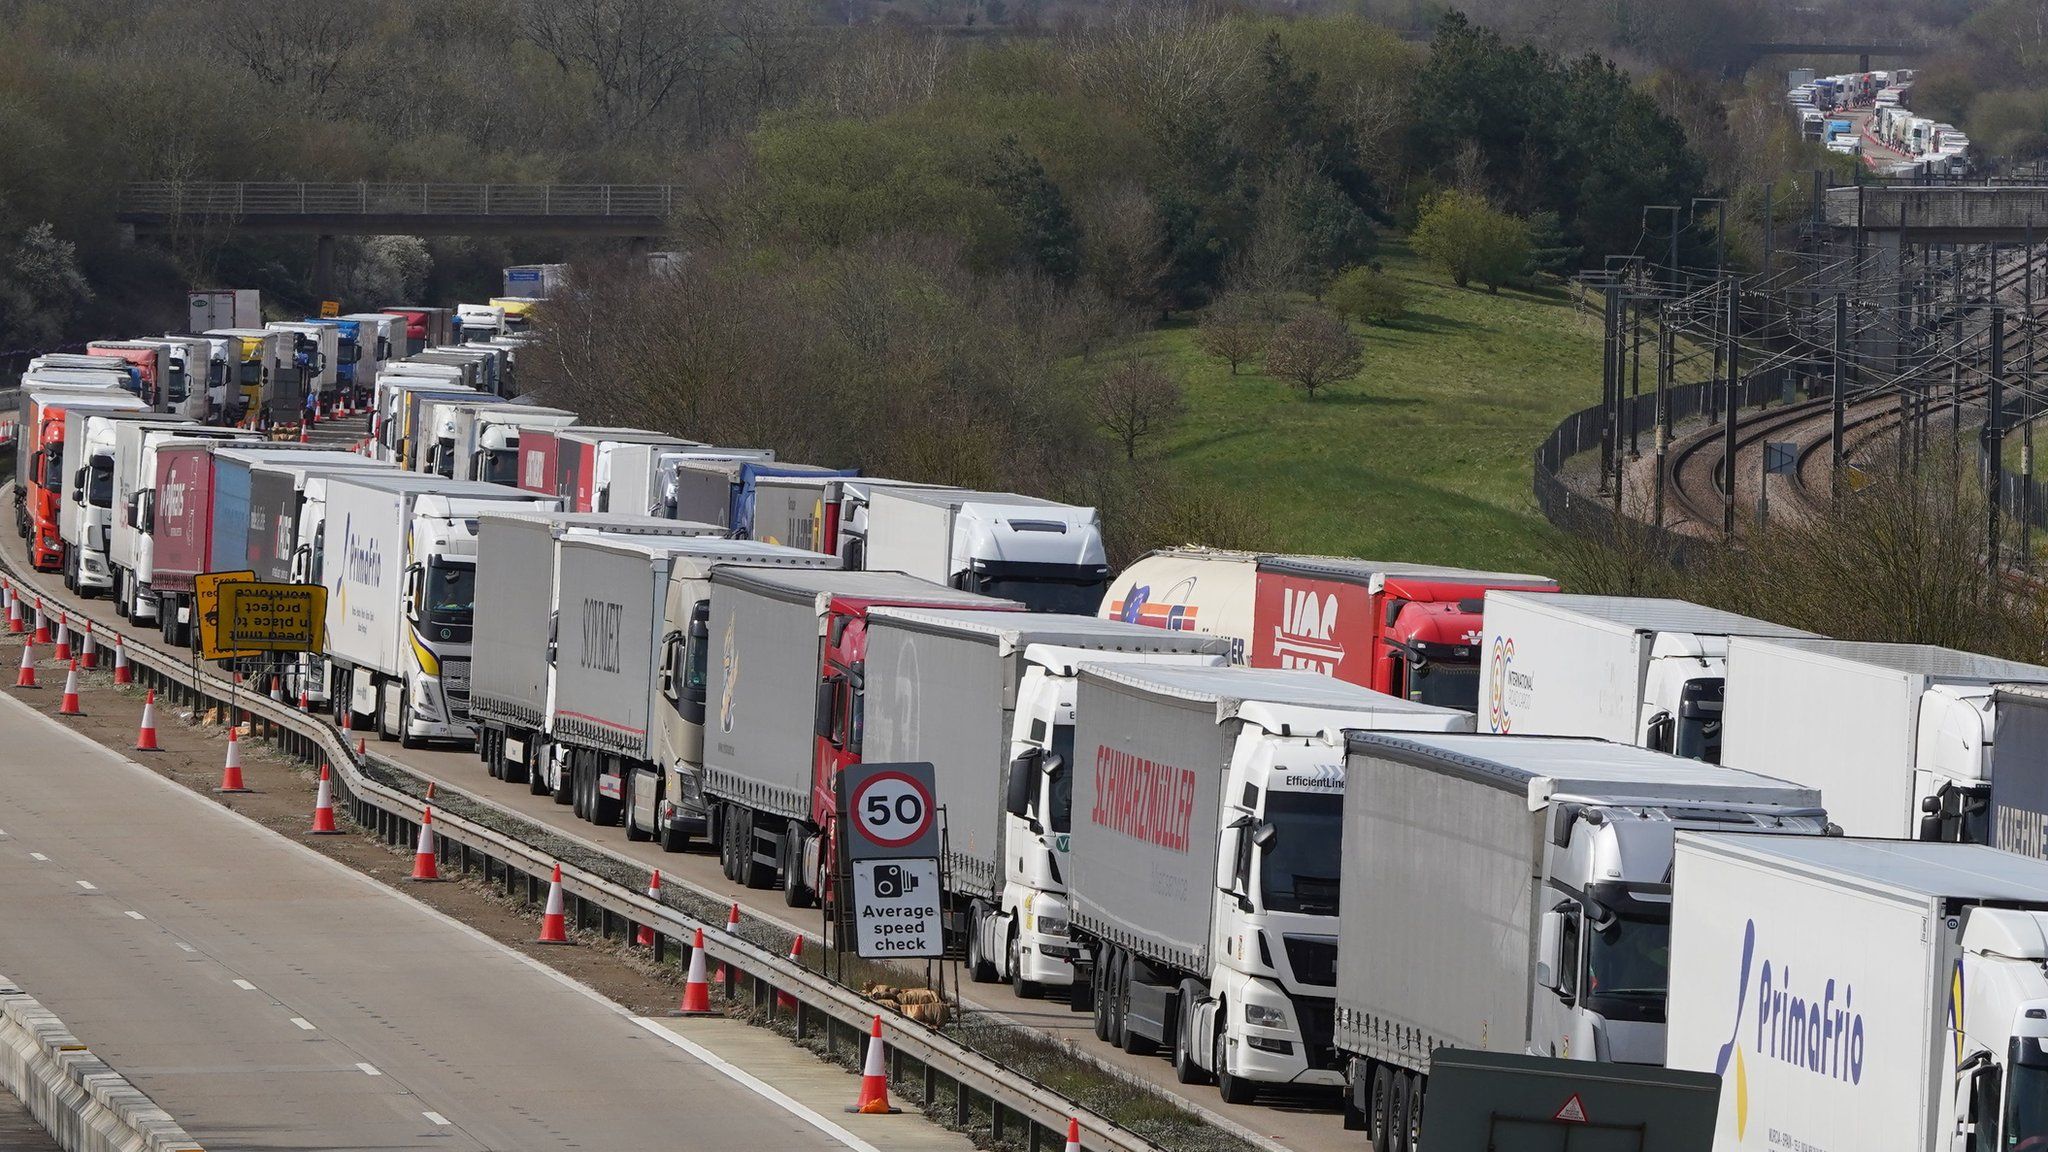 Lorries queueing on the M20 in Operation Brock